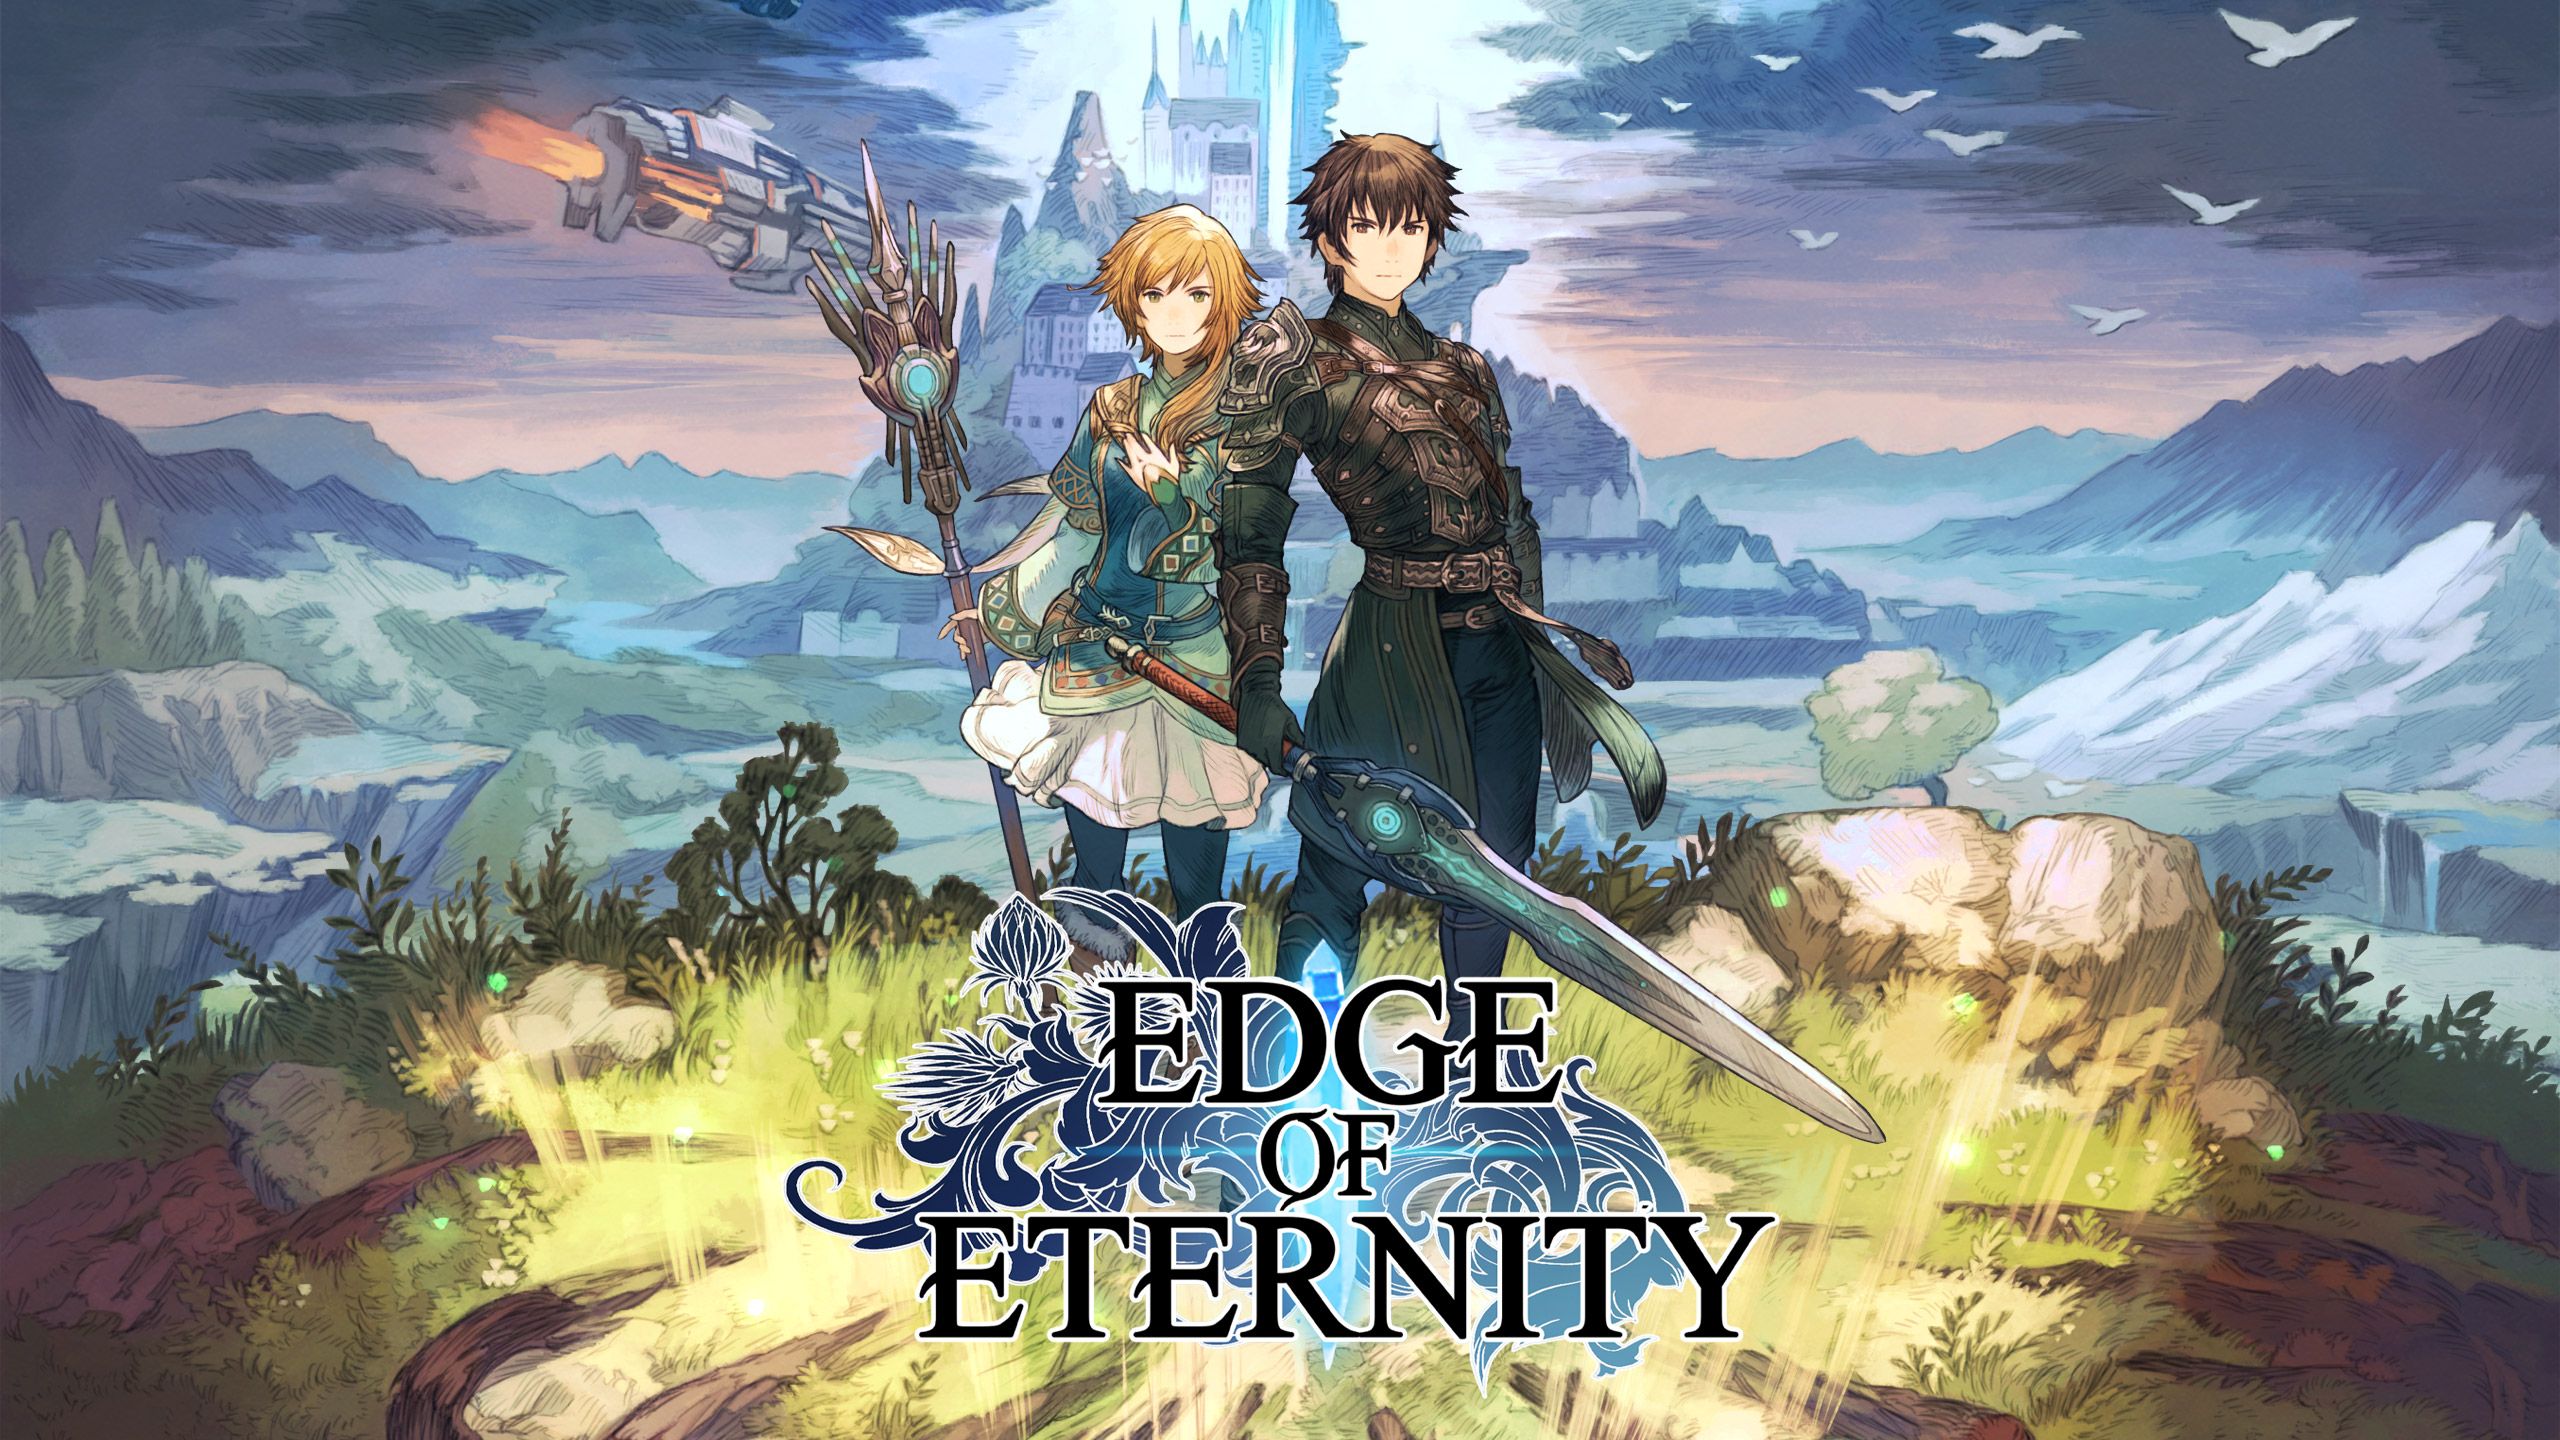 Edge of Eternity release time